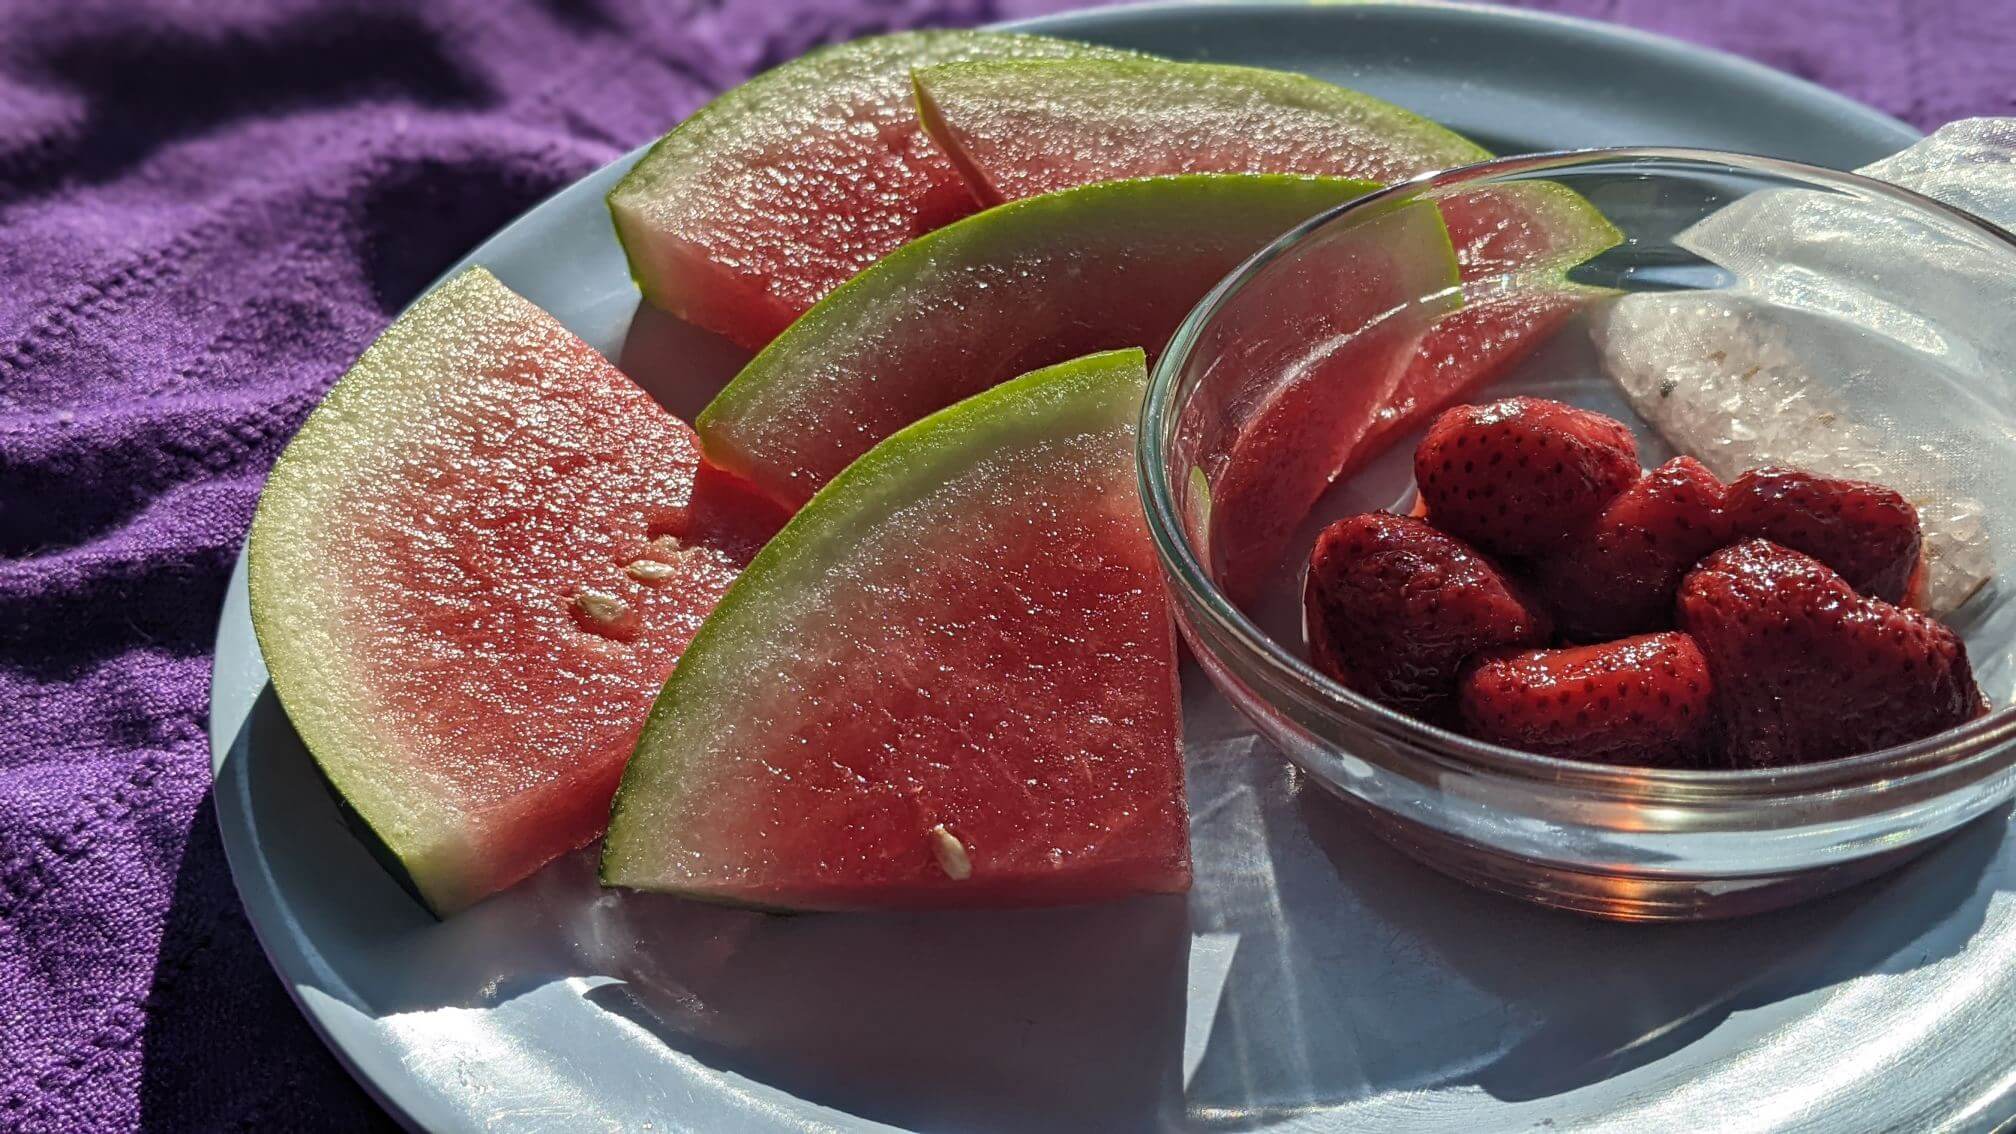 Fresh watermelon sit on a plate in the sun, with a shallow dish of thawed frozen strawberries.